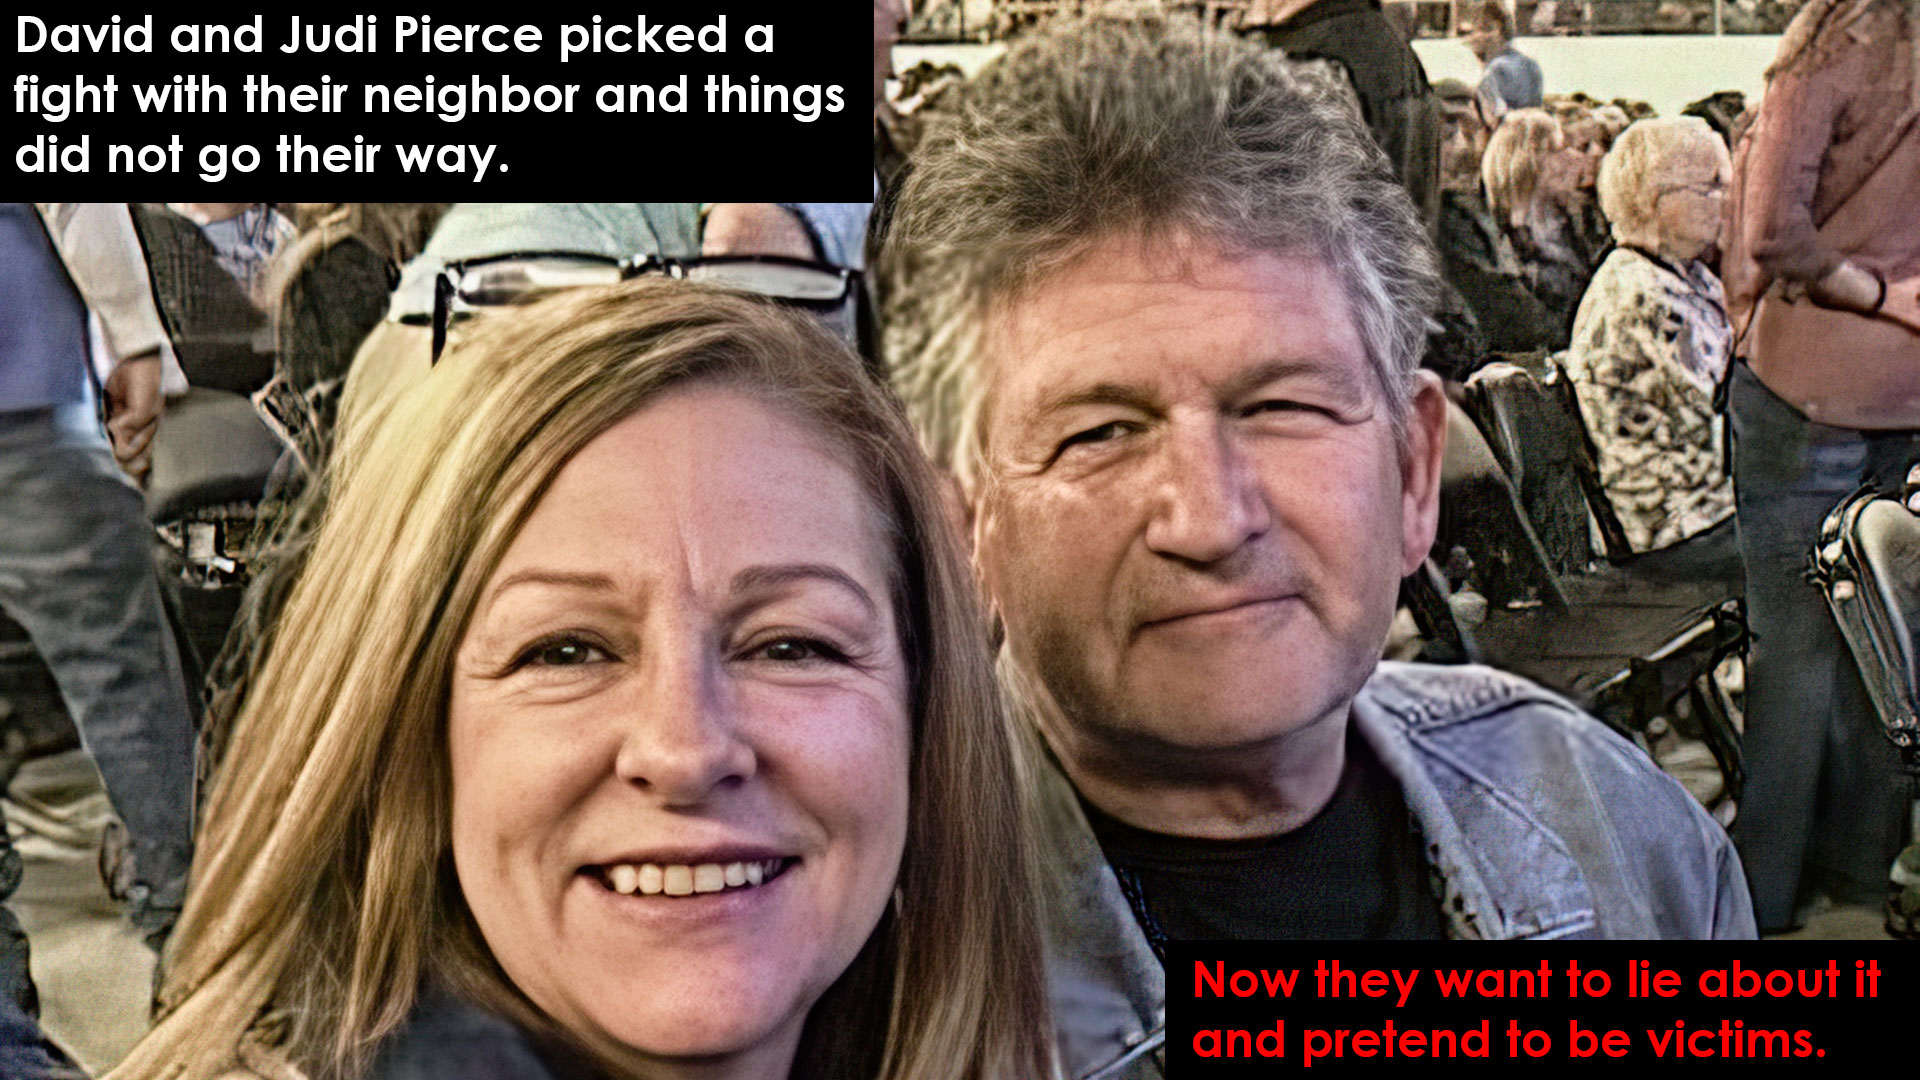 David and Judi Pierce picked a fight with their neighbor